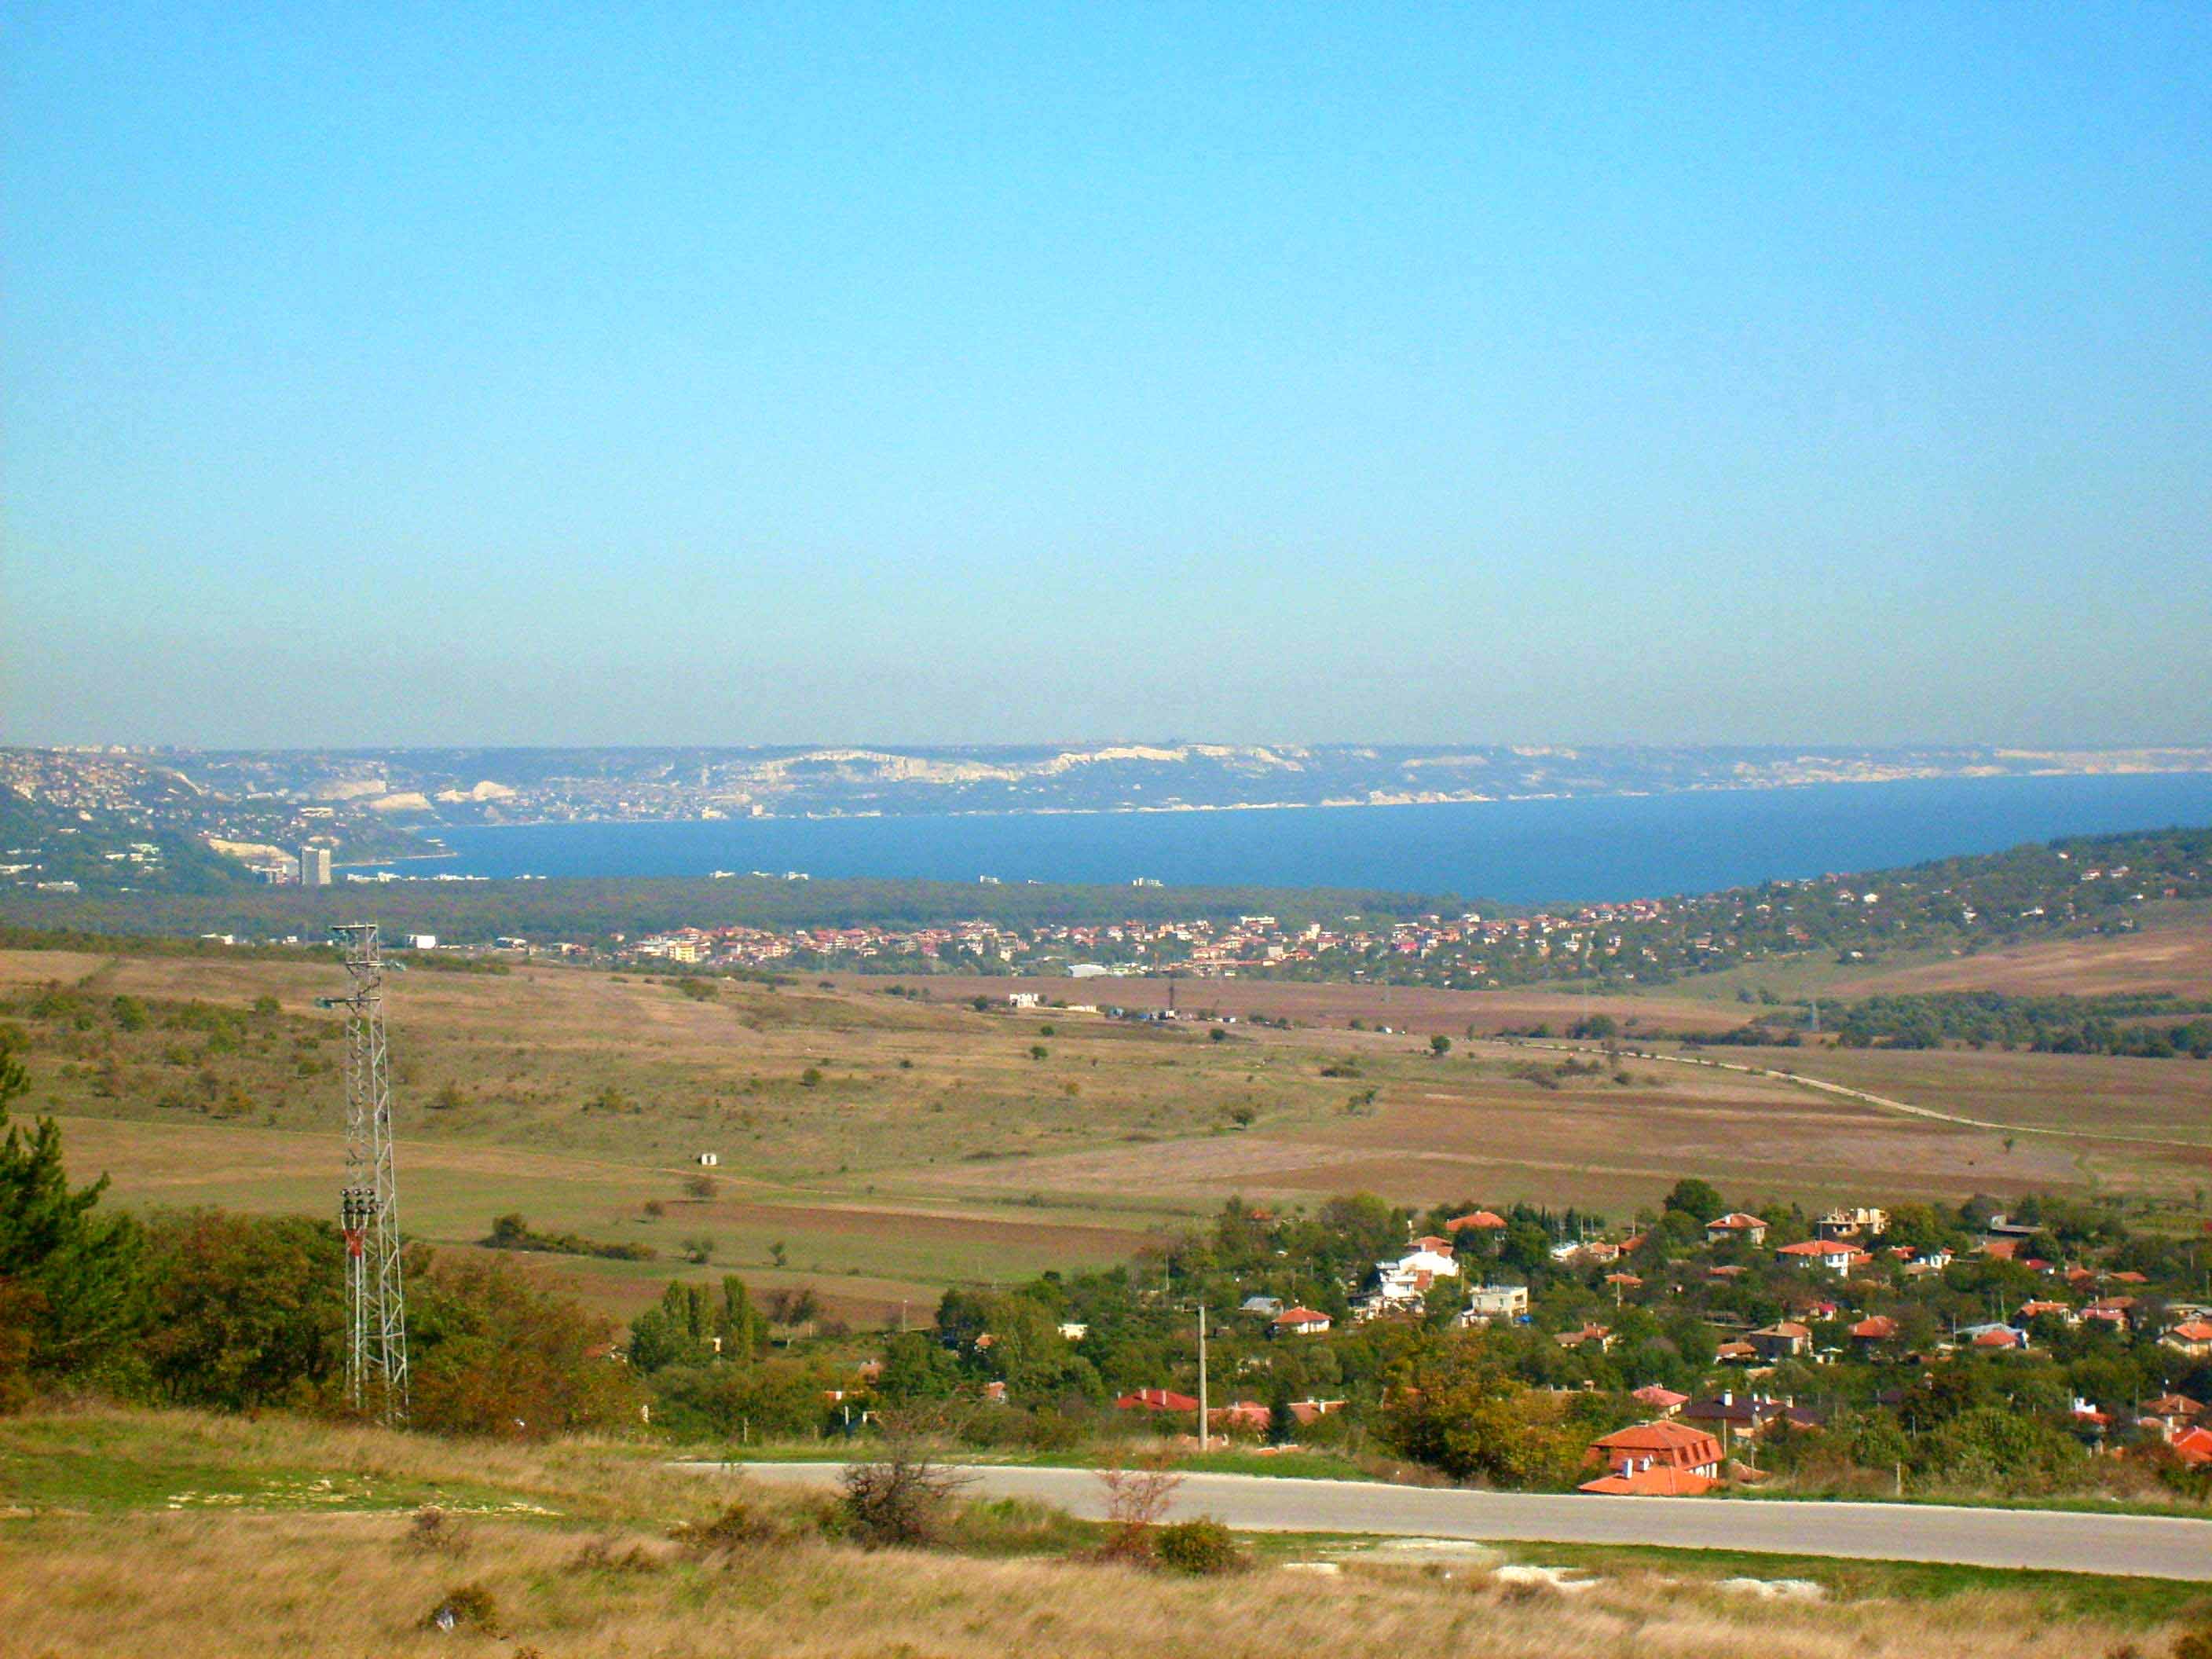 The view again to Albena, Osenovo and the Black Sea (Cherno More). The land has a perfect asphalt road attached and is accessible all year round.